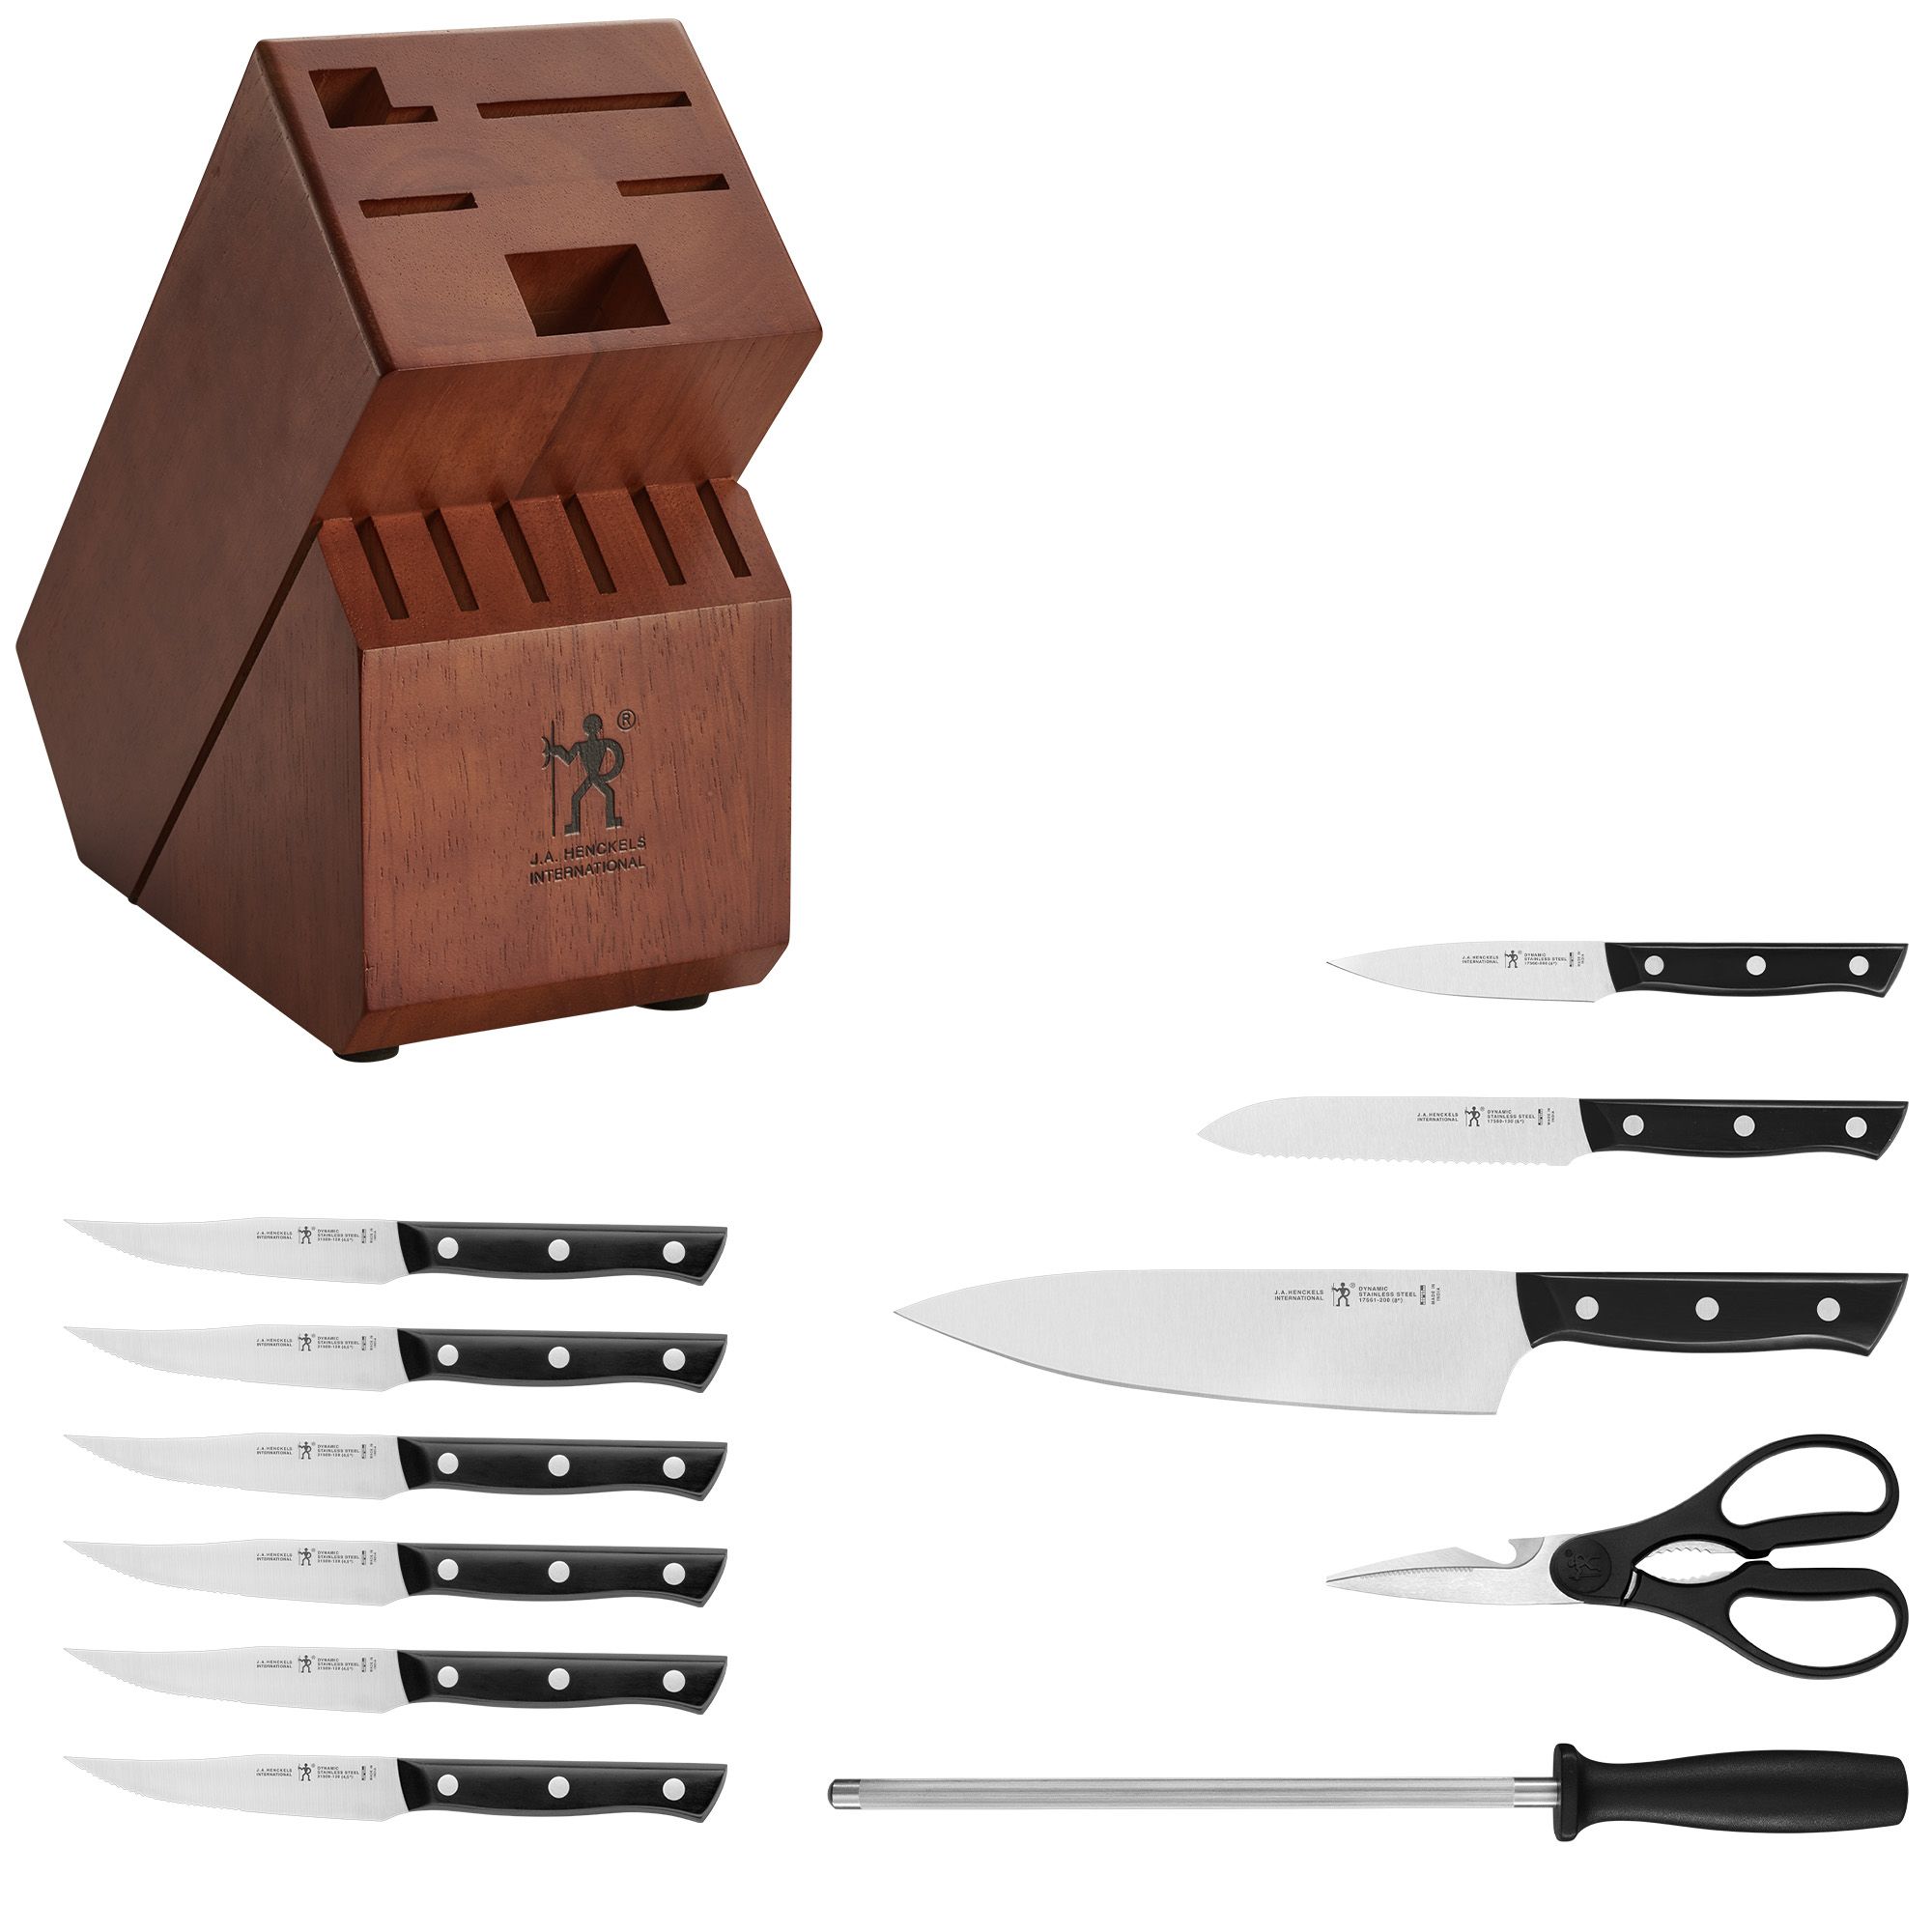 Knife Sets for sale in Toccoa, Georgia